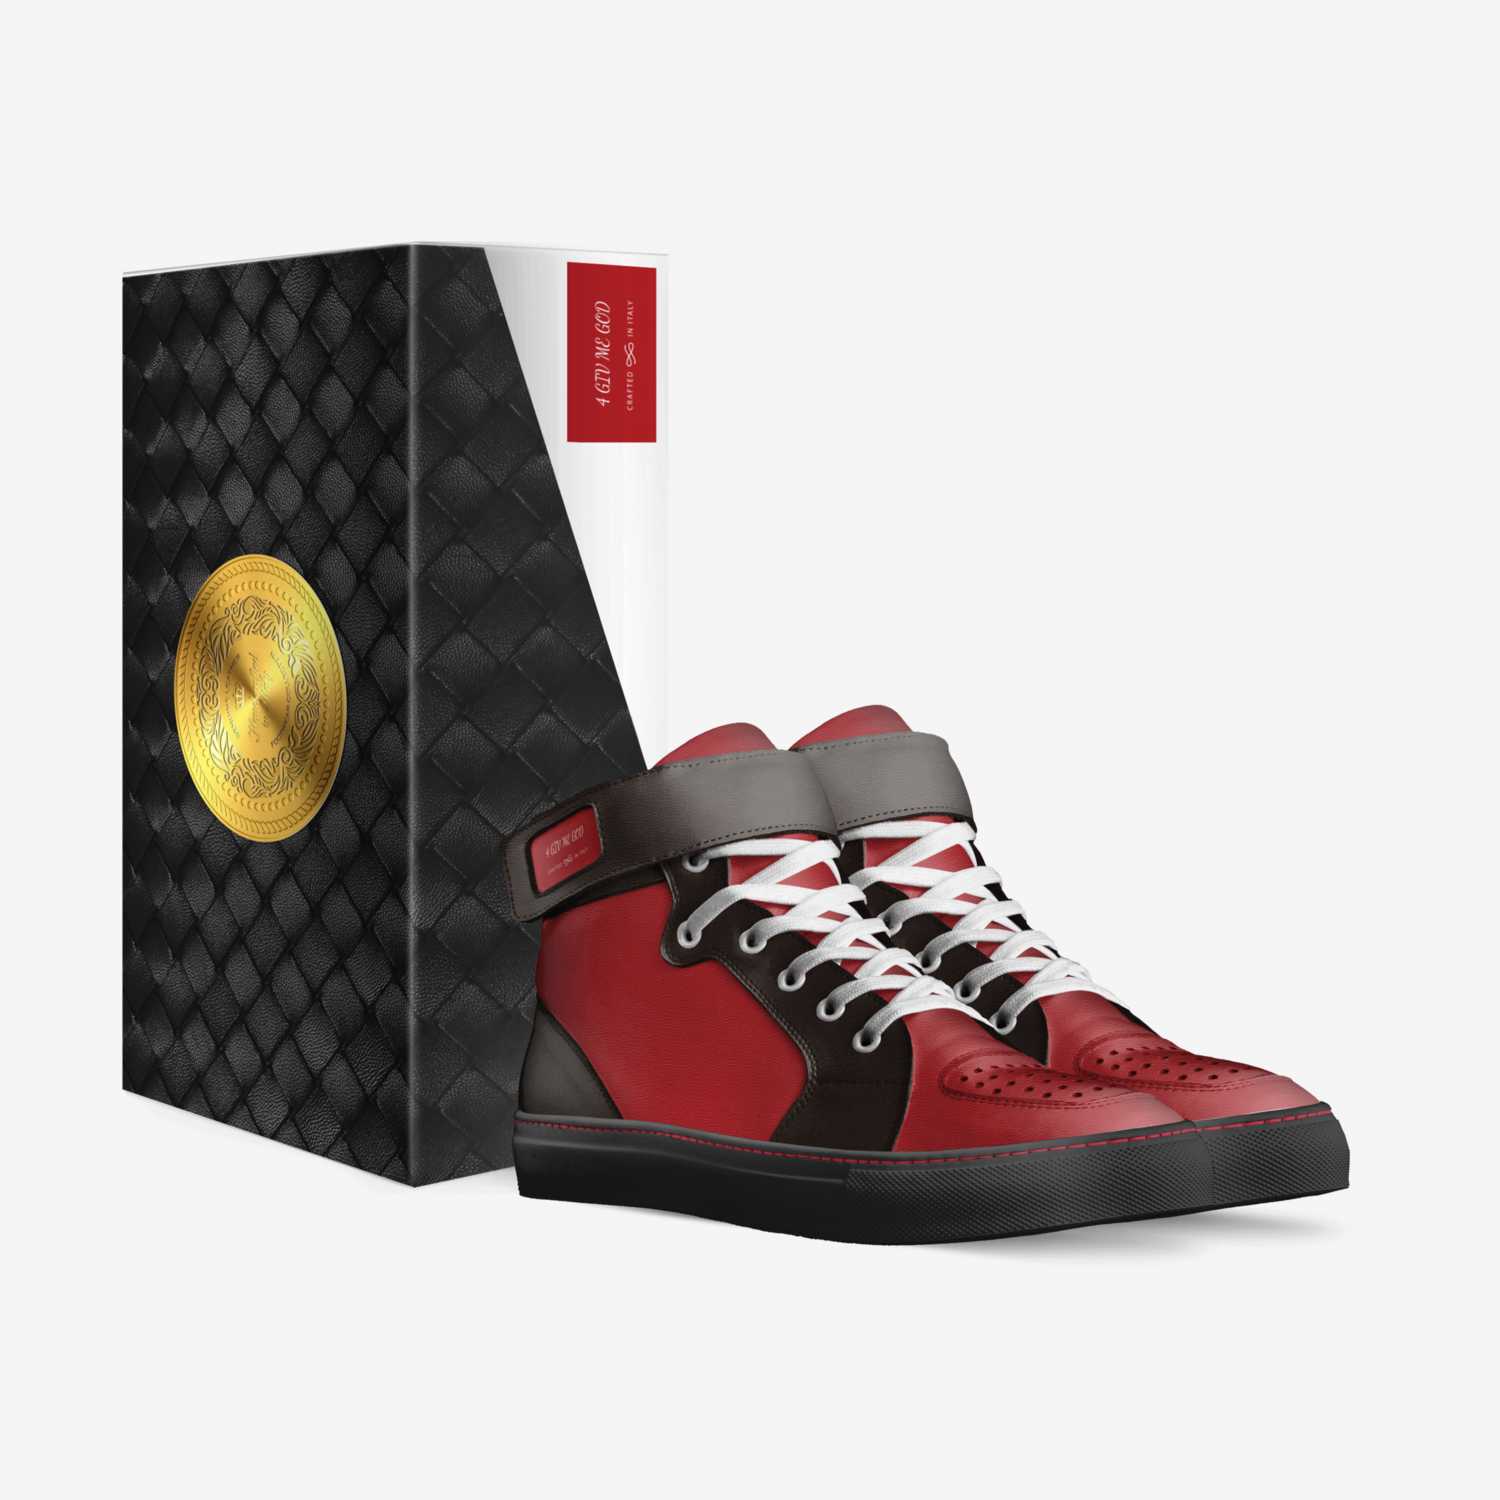 4GIVMEGODS custom made in Italy shoes by Sebastian Mcneill | Box view